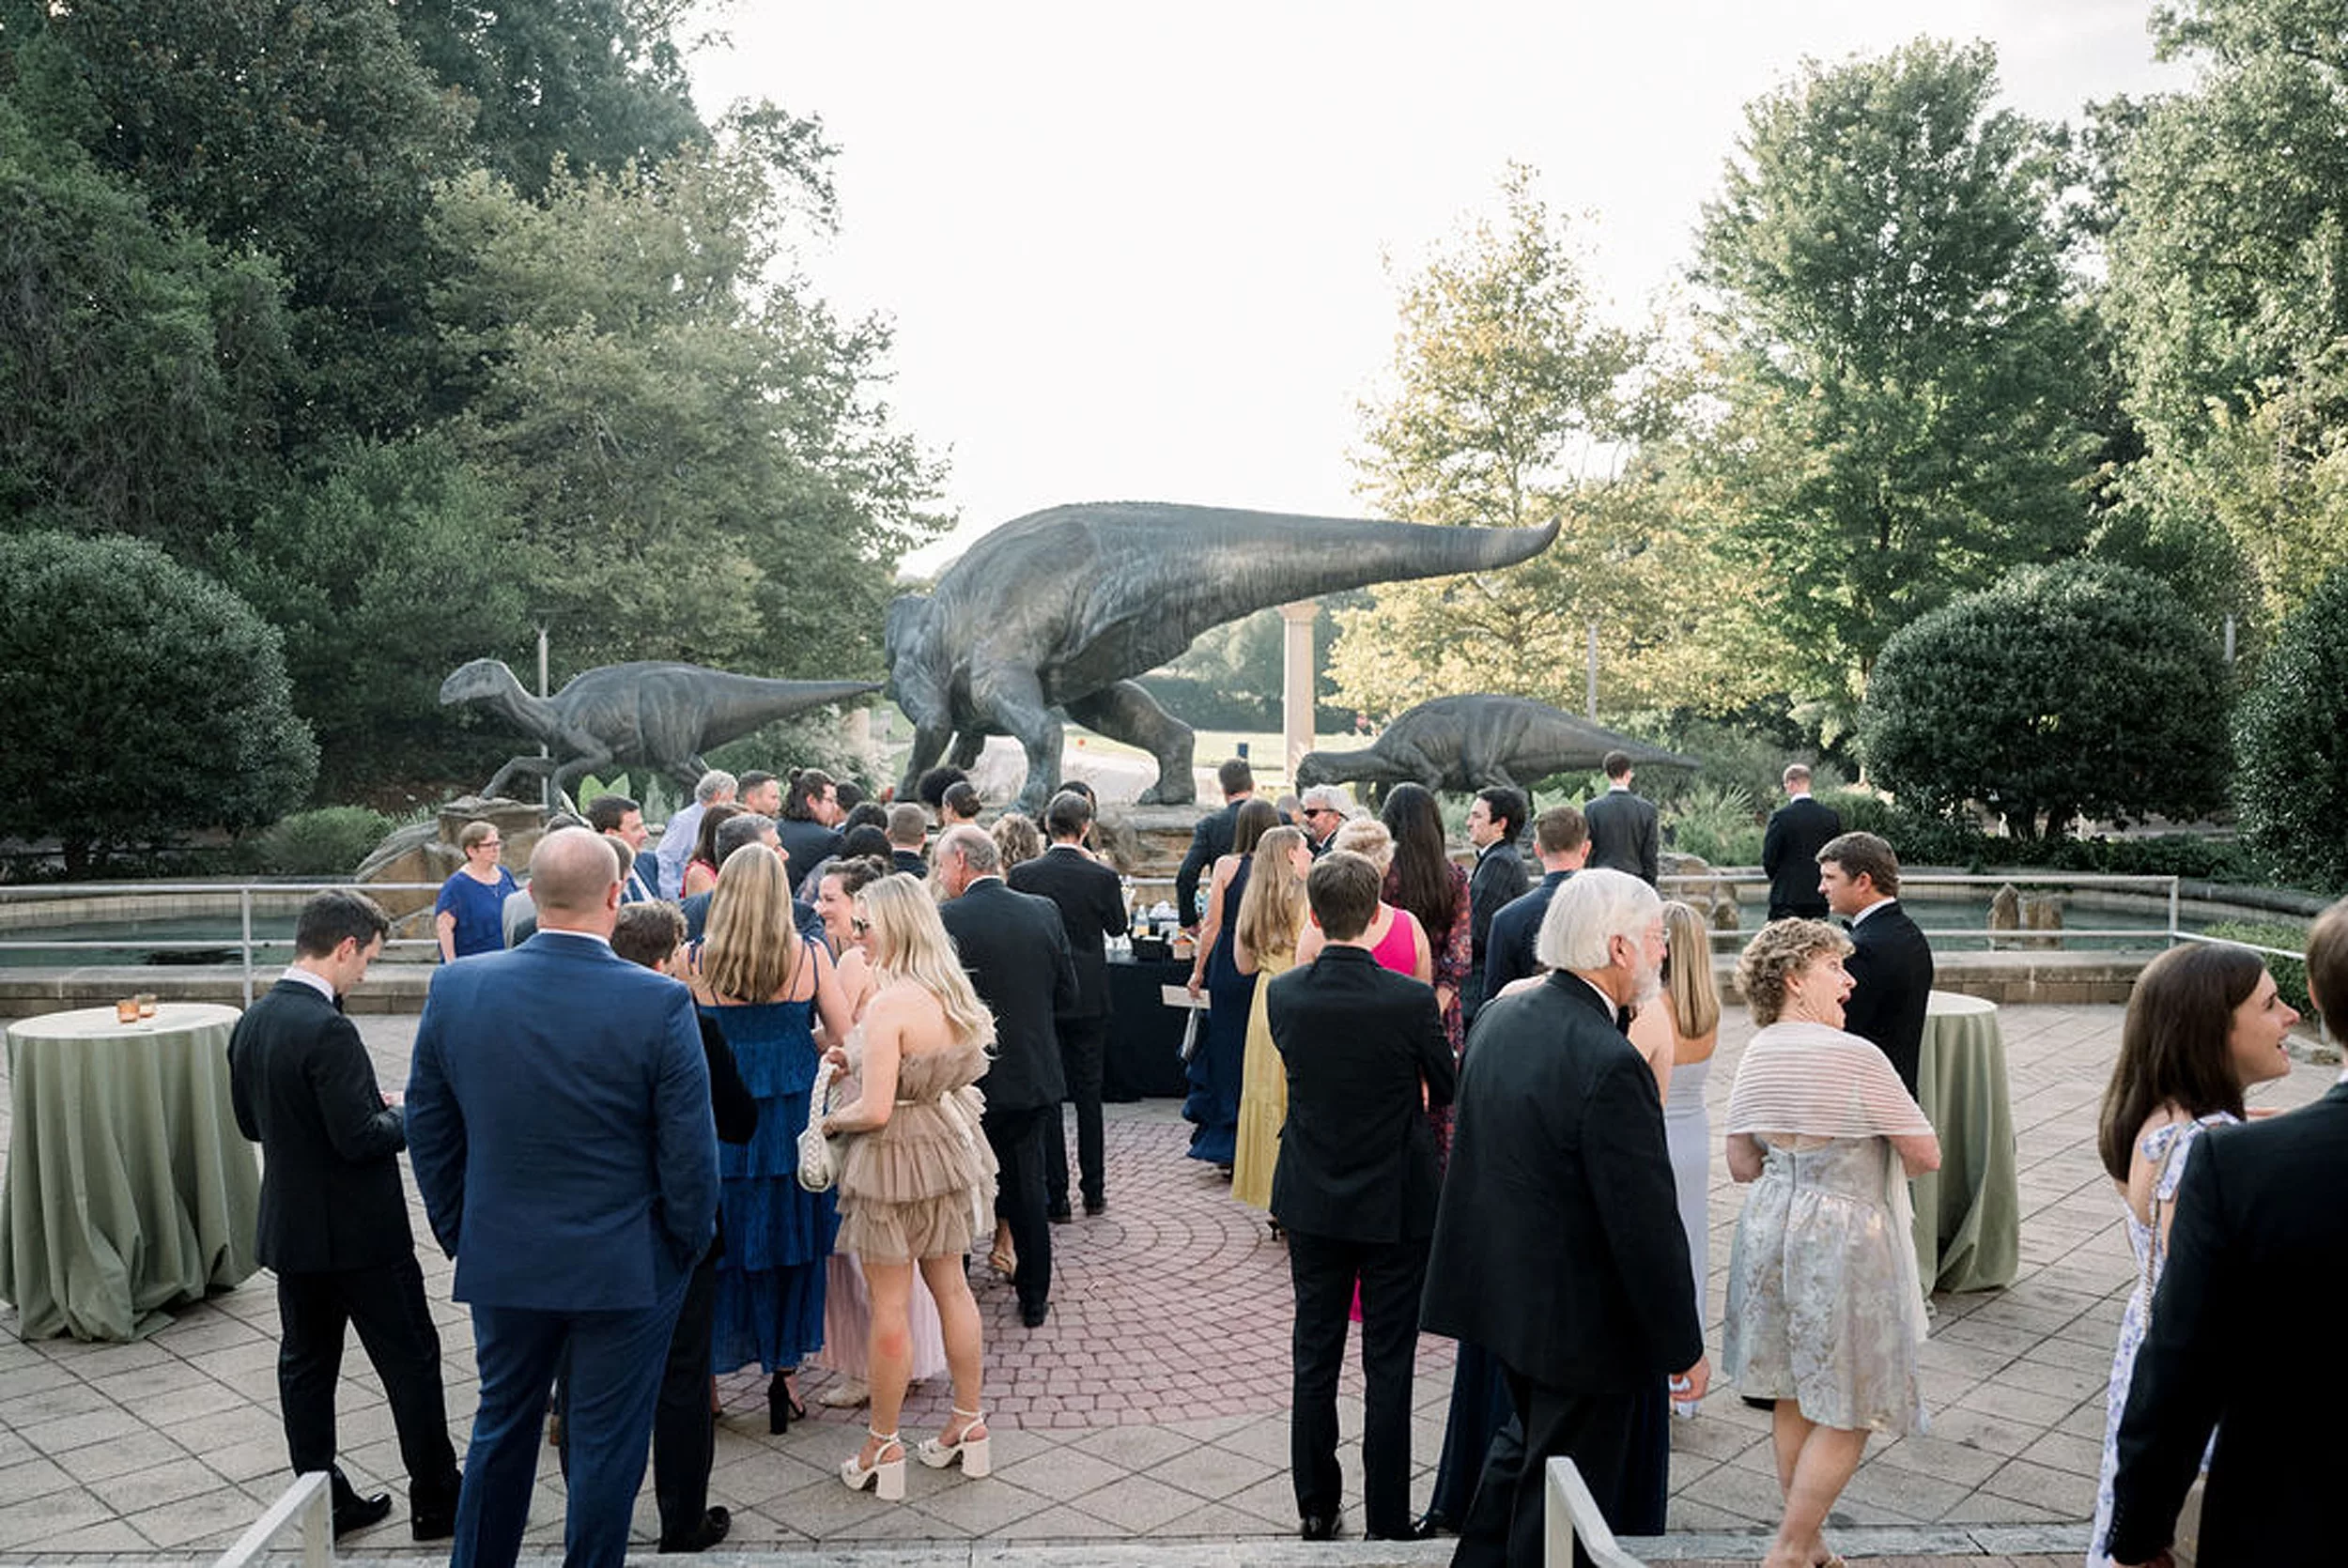 A wide view of a wedding reception set up in a garden surrounded by dinosaur statues